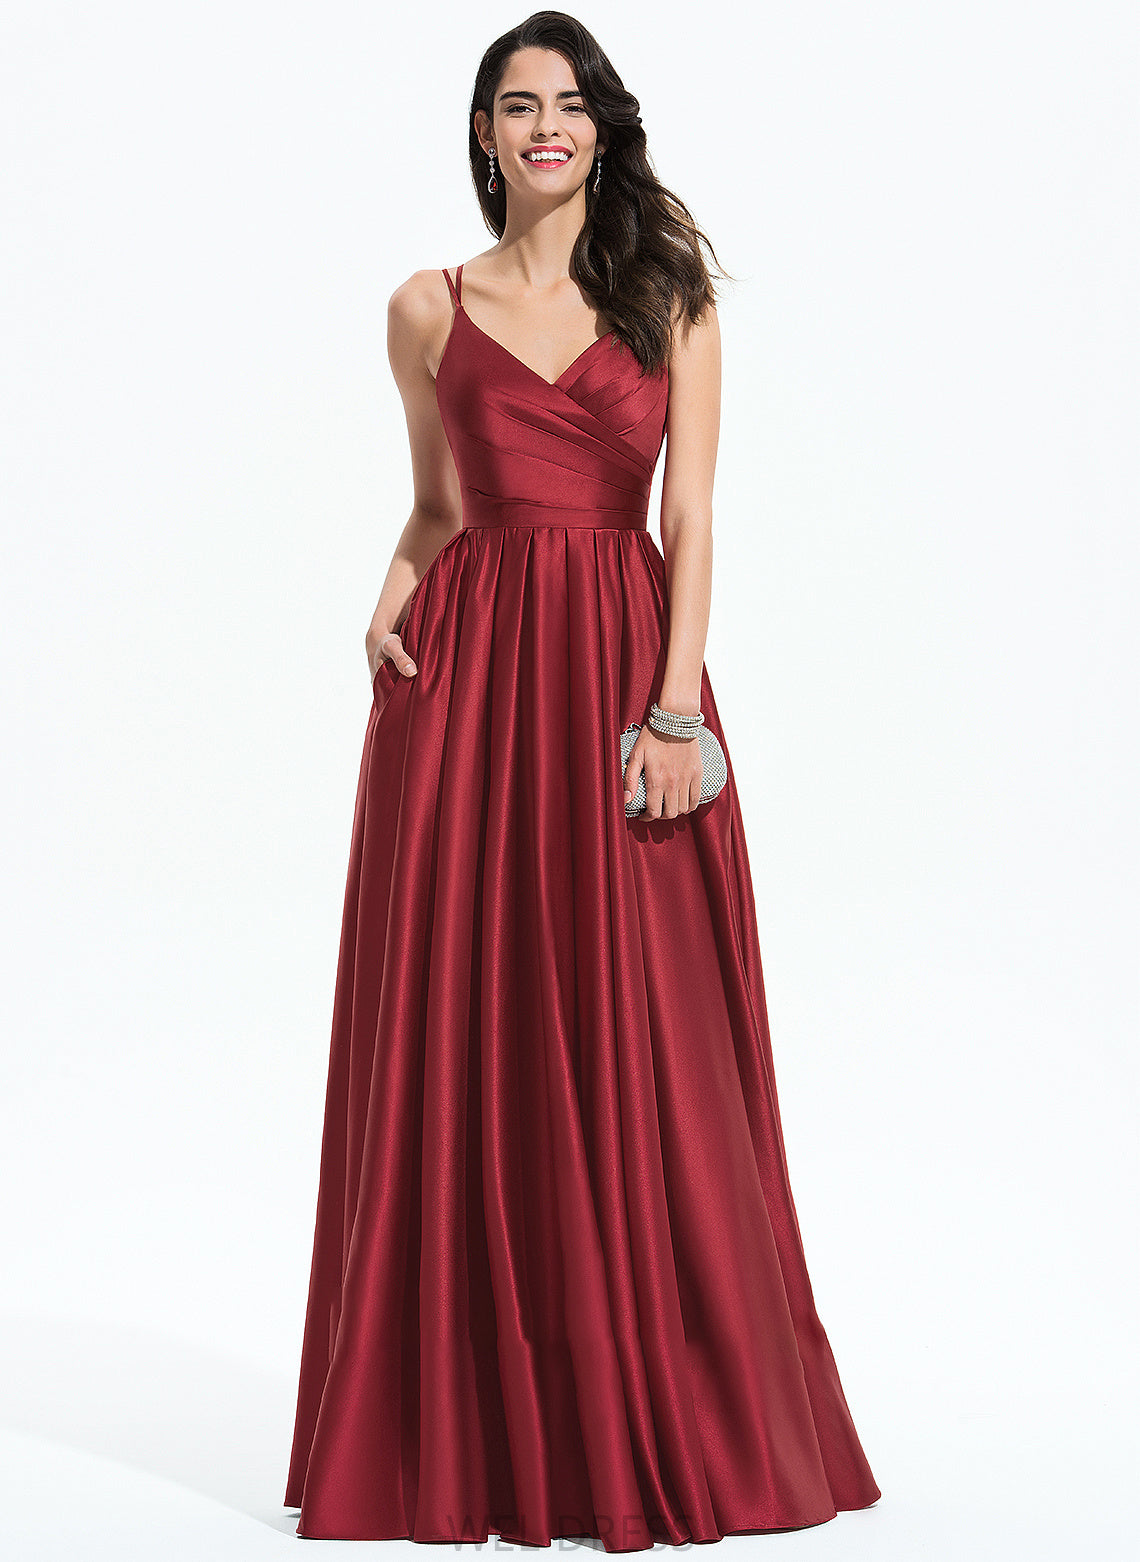 Satin With Prom Dresses Karly Pockets Ruffle V-neck Floor-Length A-Line